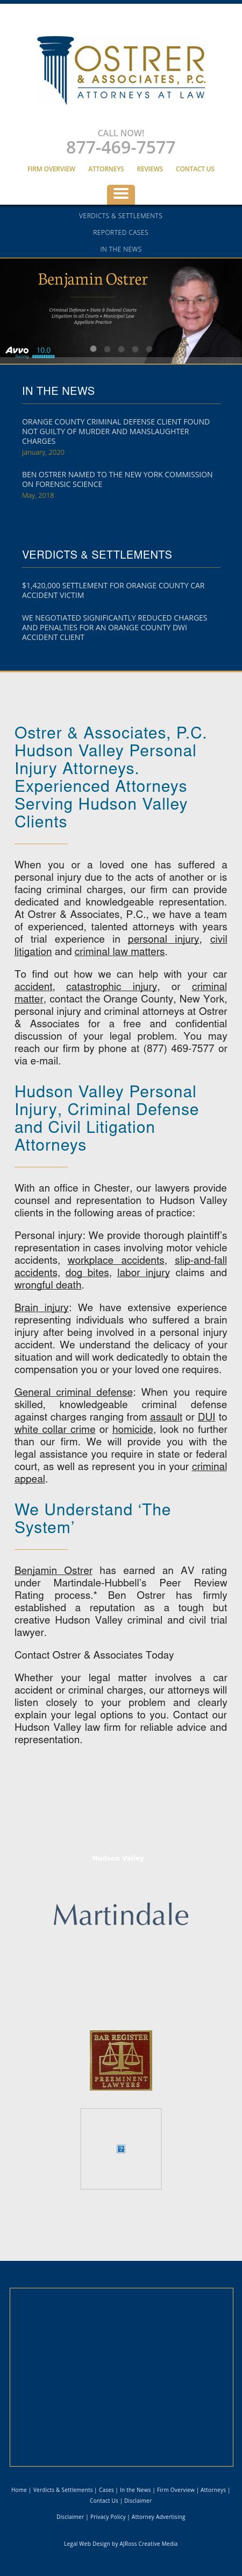 Ostrer & Associates, P.C. - Chester NY Lawyers